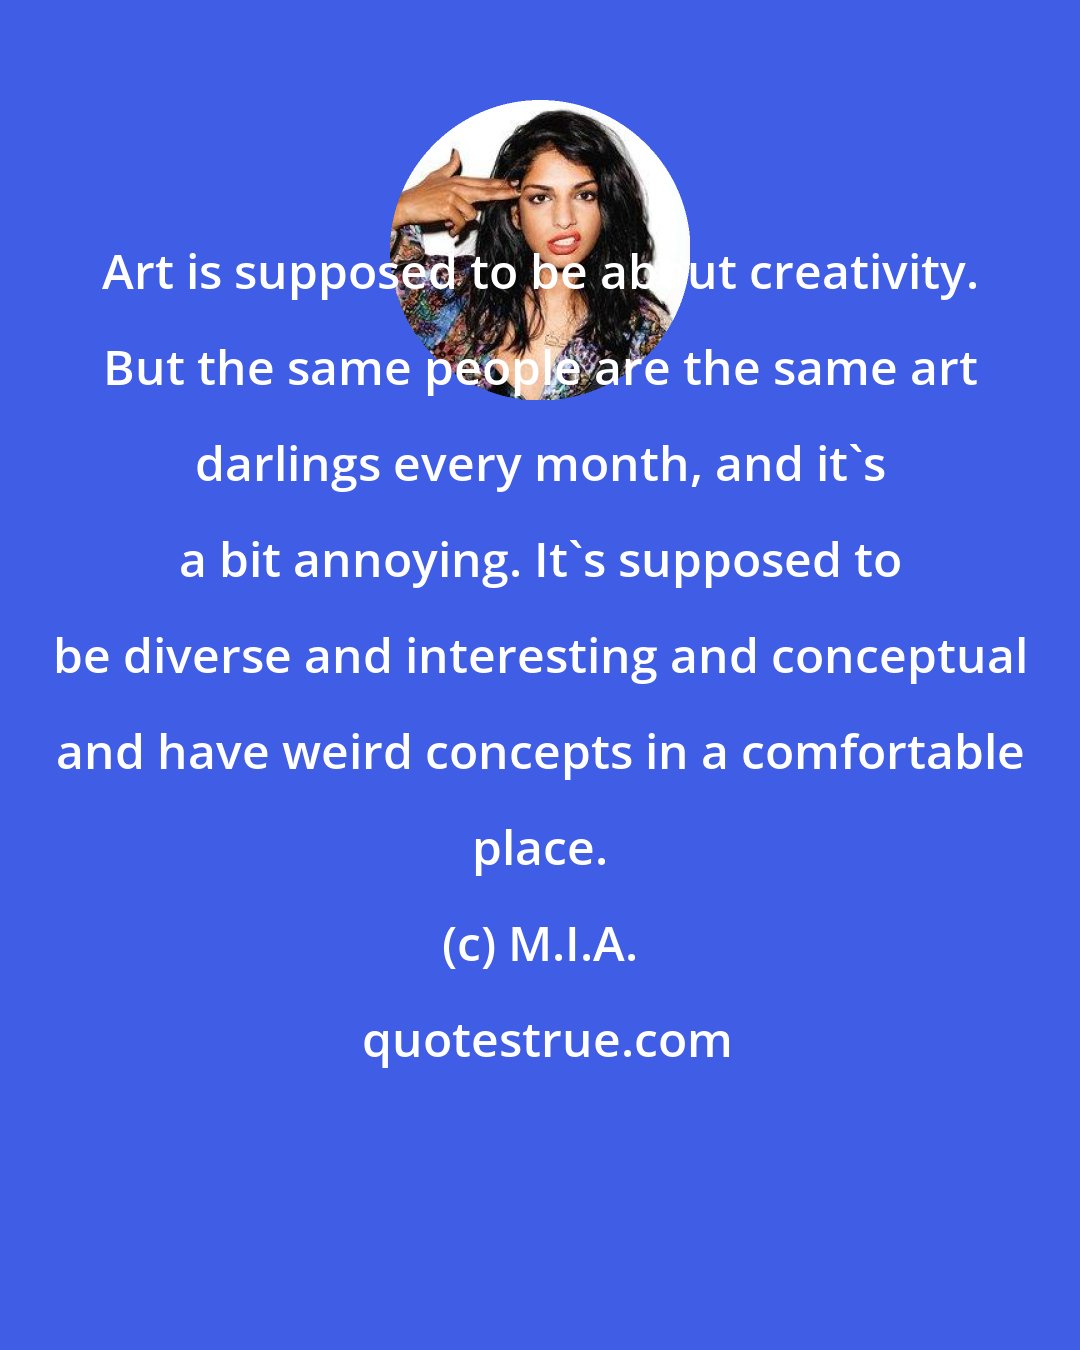 M.I.A.: Art is supposed to be about creativity. But the same people are the same art darlings every month, and it's a bit annoying. It's supposed to be diverse and interesting and conceptual and have weird concepts in a comfortable place.